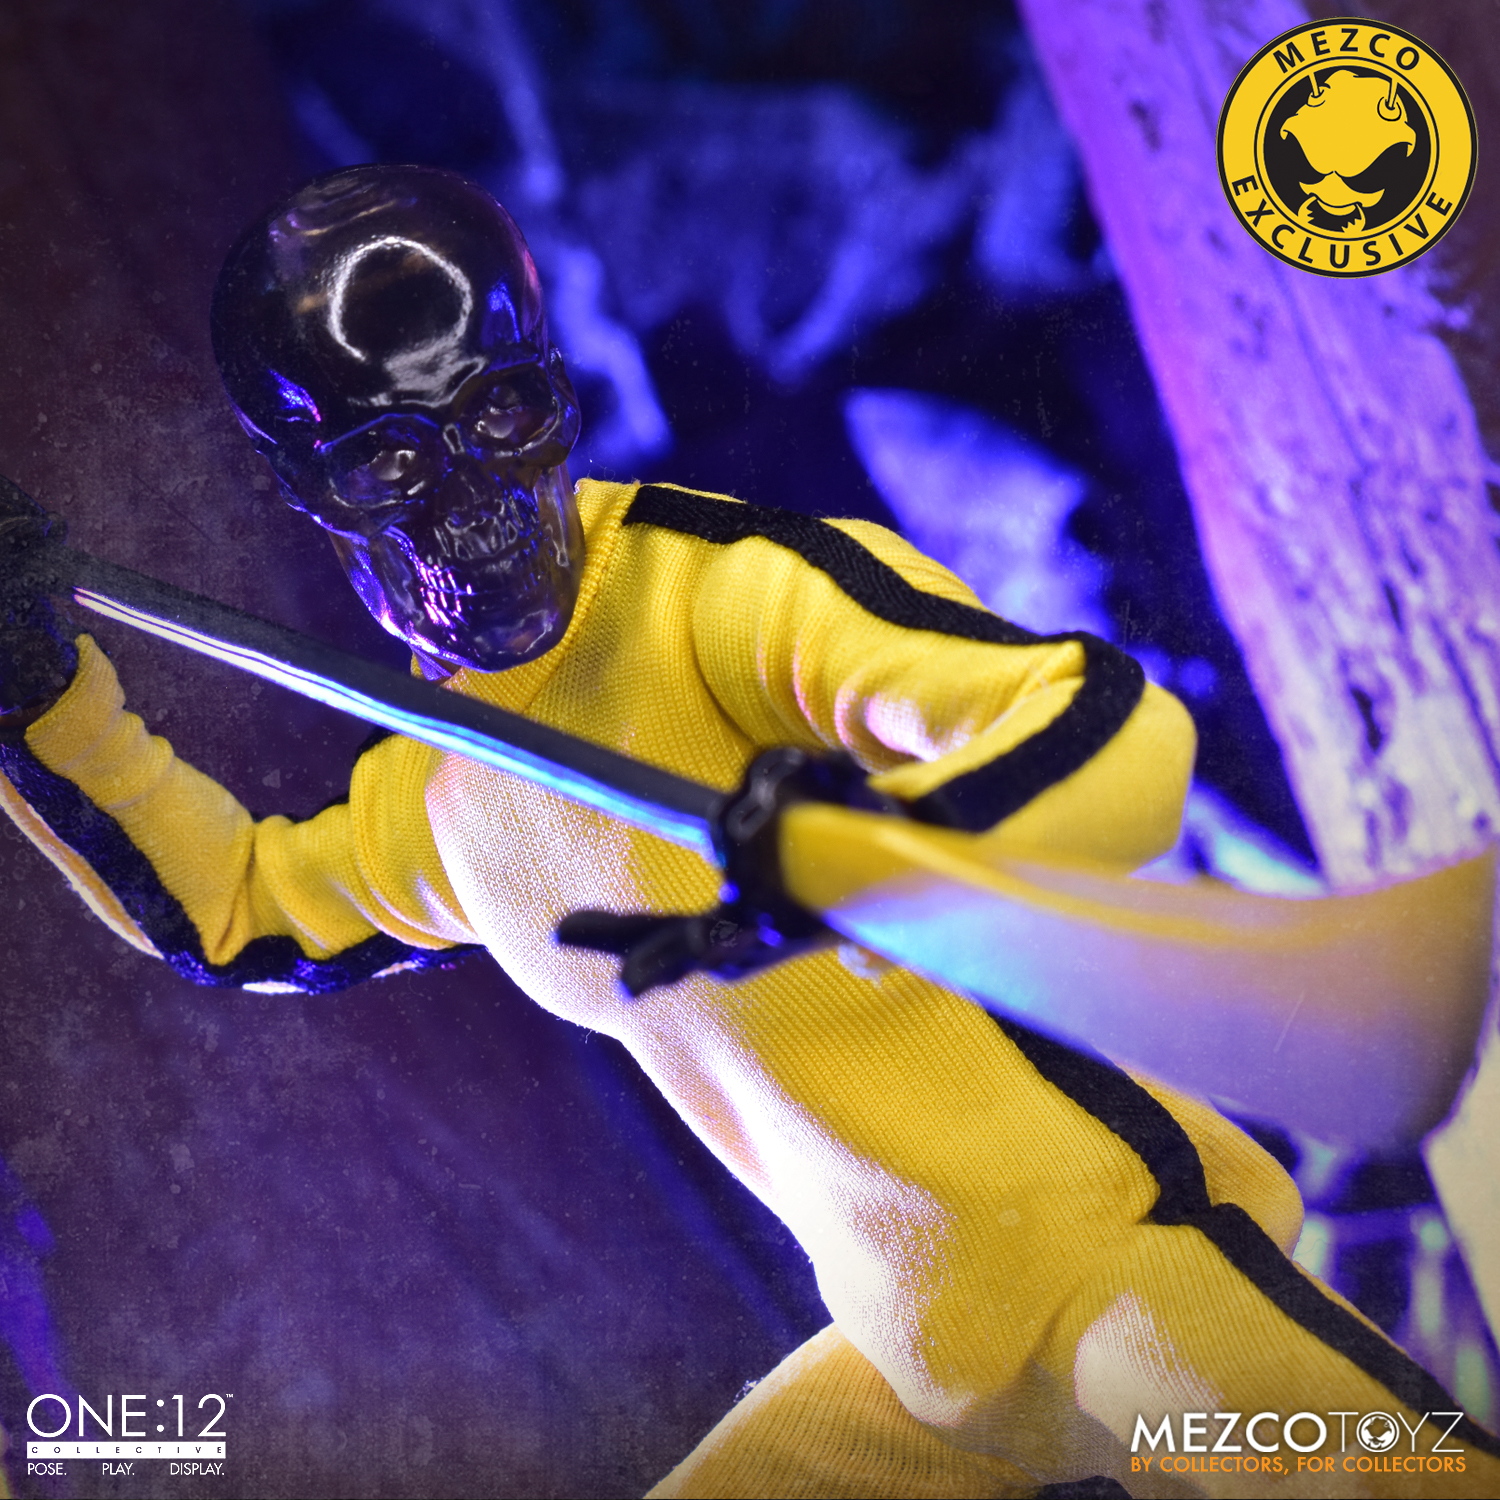 HEAD SCULPT CLASSIC WITH YELLOW EYES Mezco One:12 GOMEZ OF DEATH 